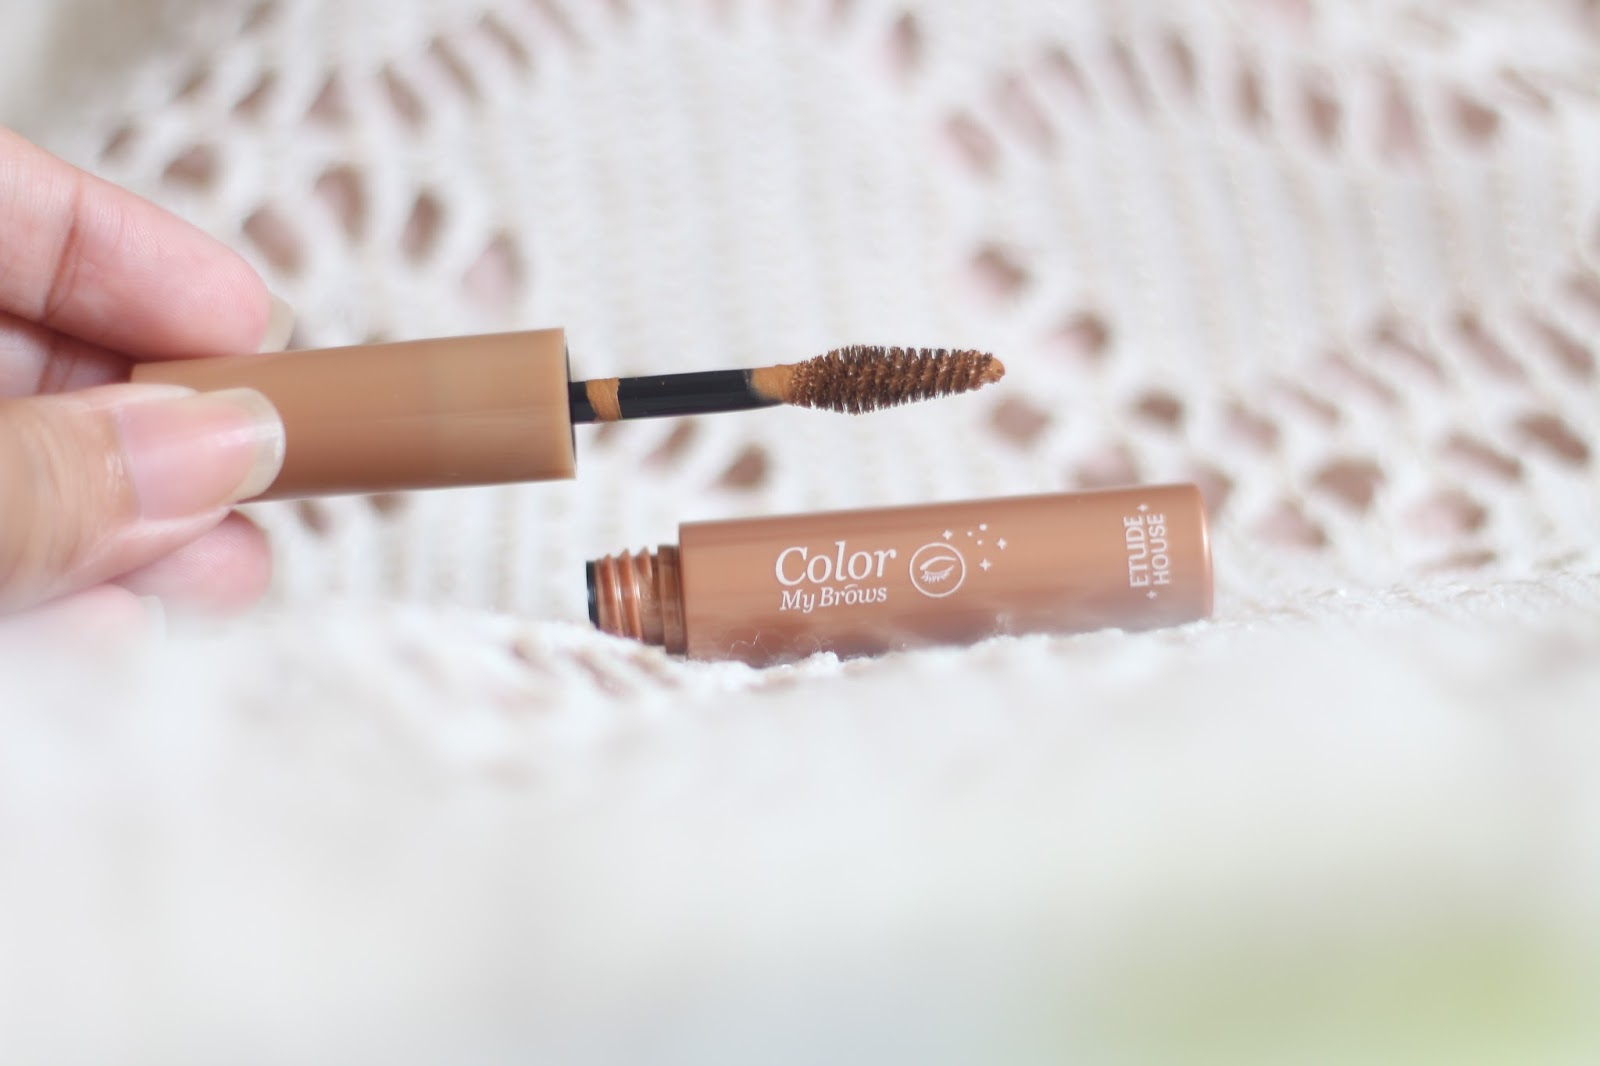 Review: Etude House Color My Brows Review.